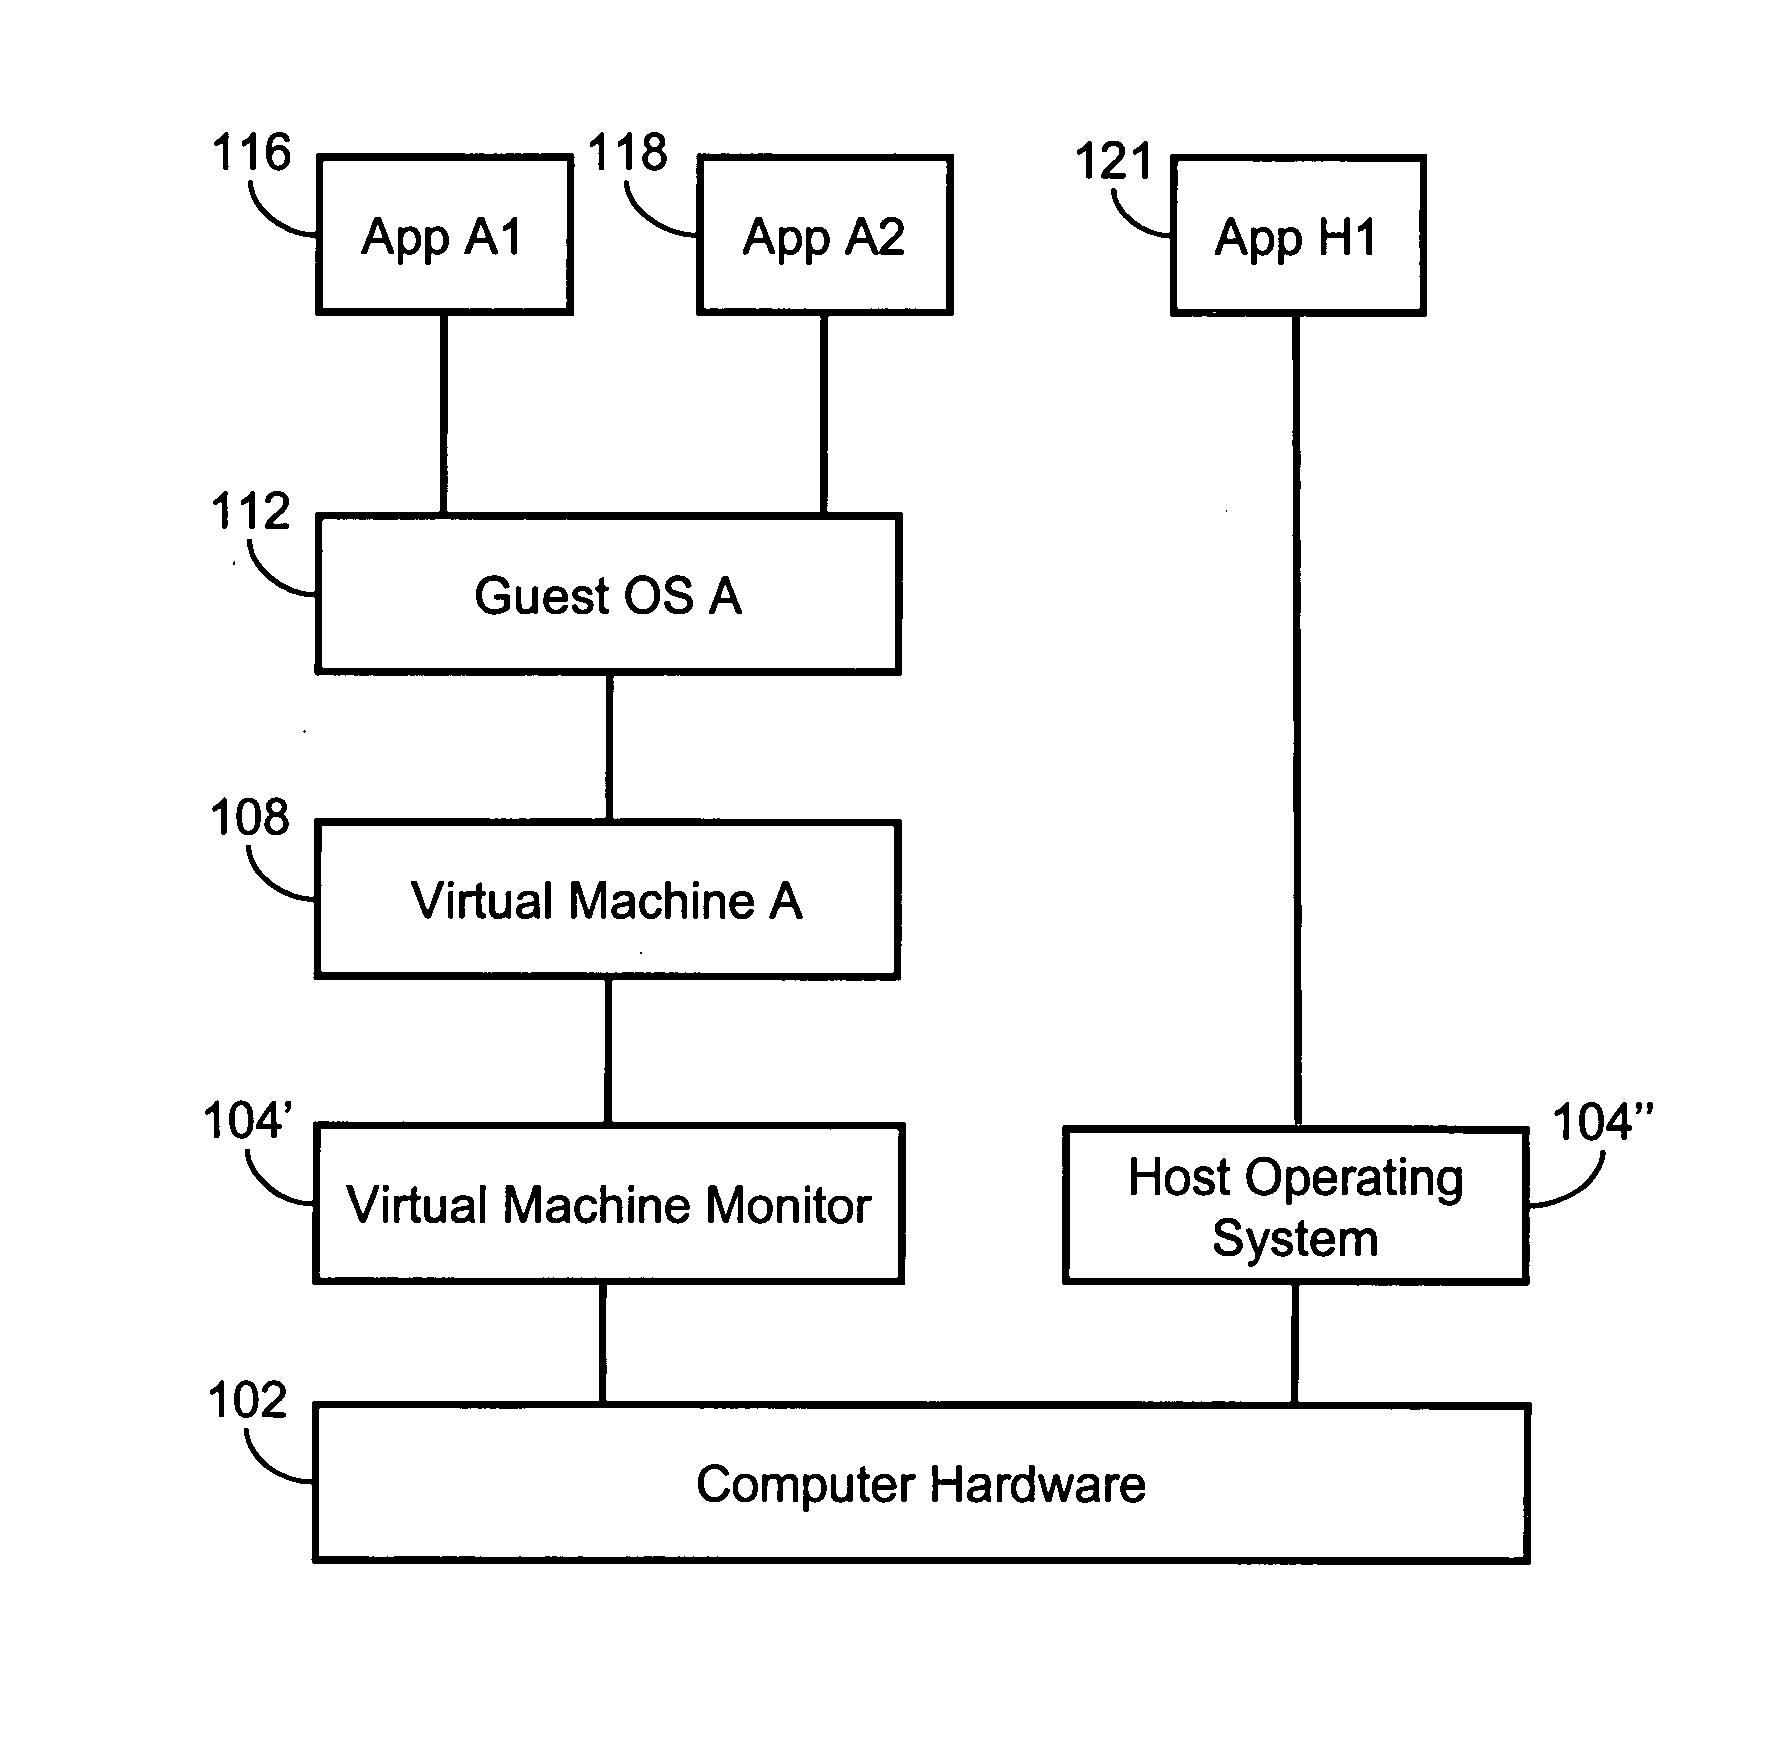 Systems and methods for integrating application windows in a virtual machine environment